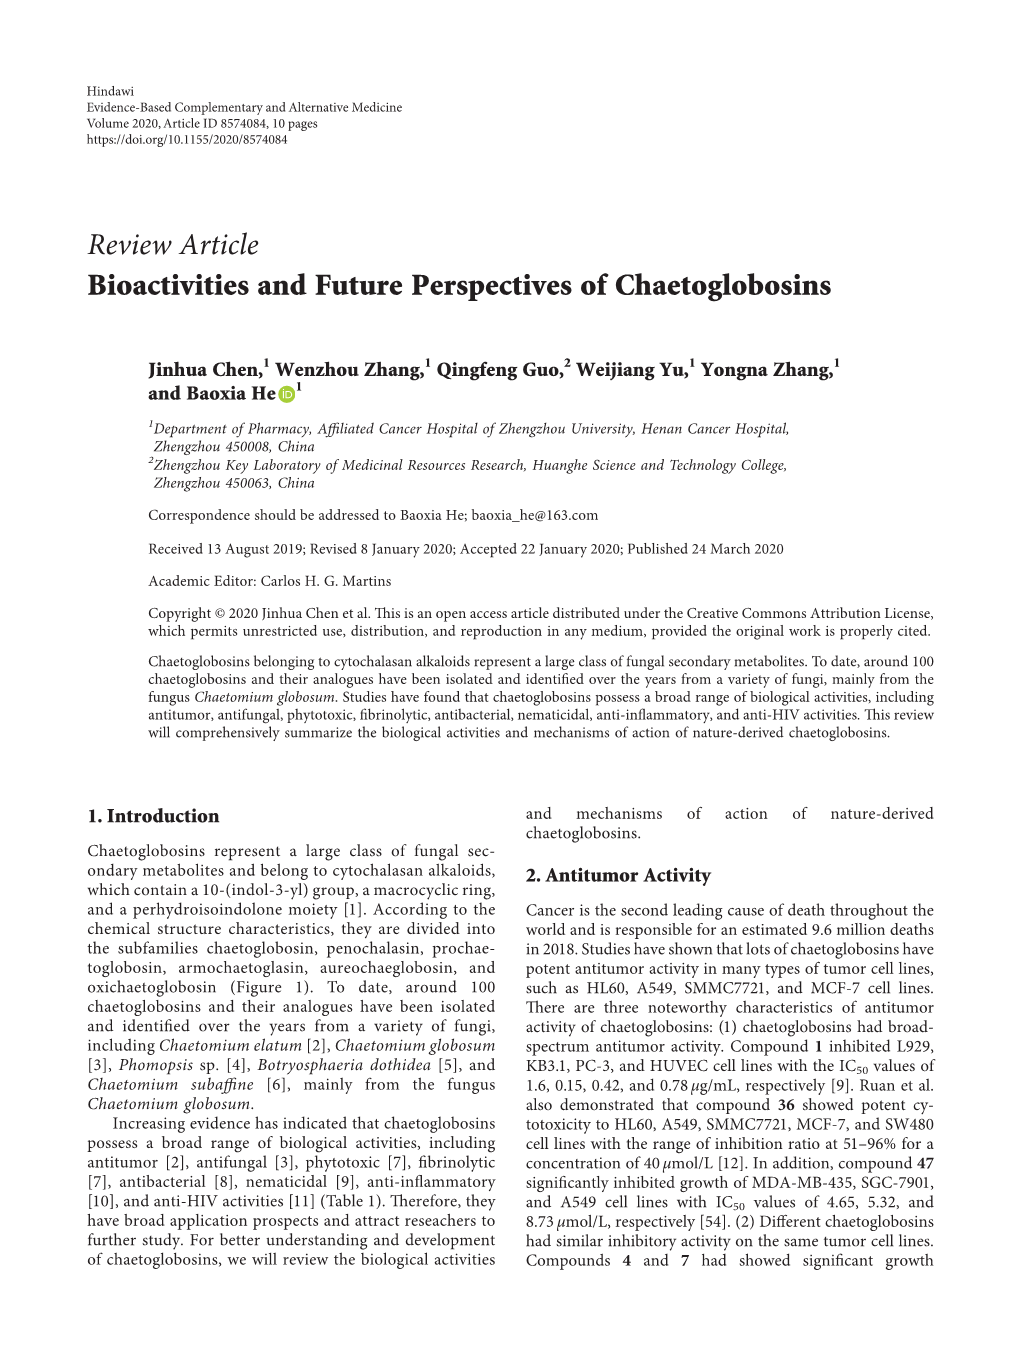 Review Article Bioactivities and Future Perspectives of Chaetoglobosins